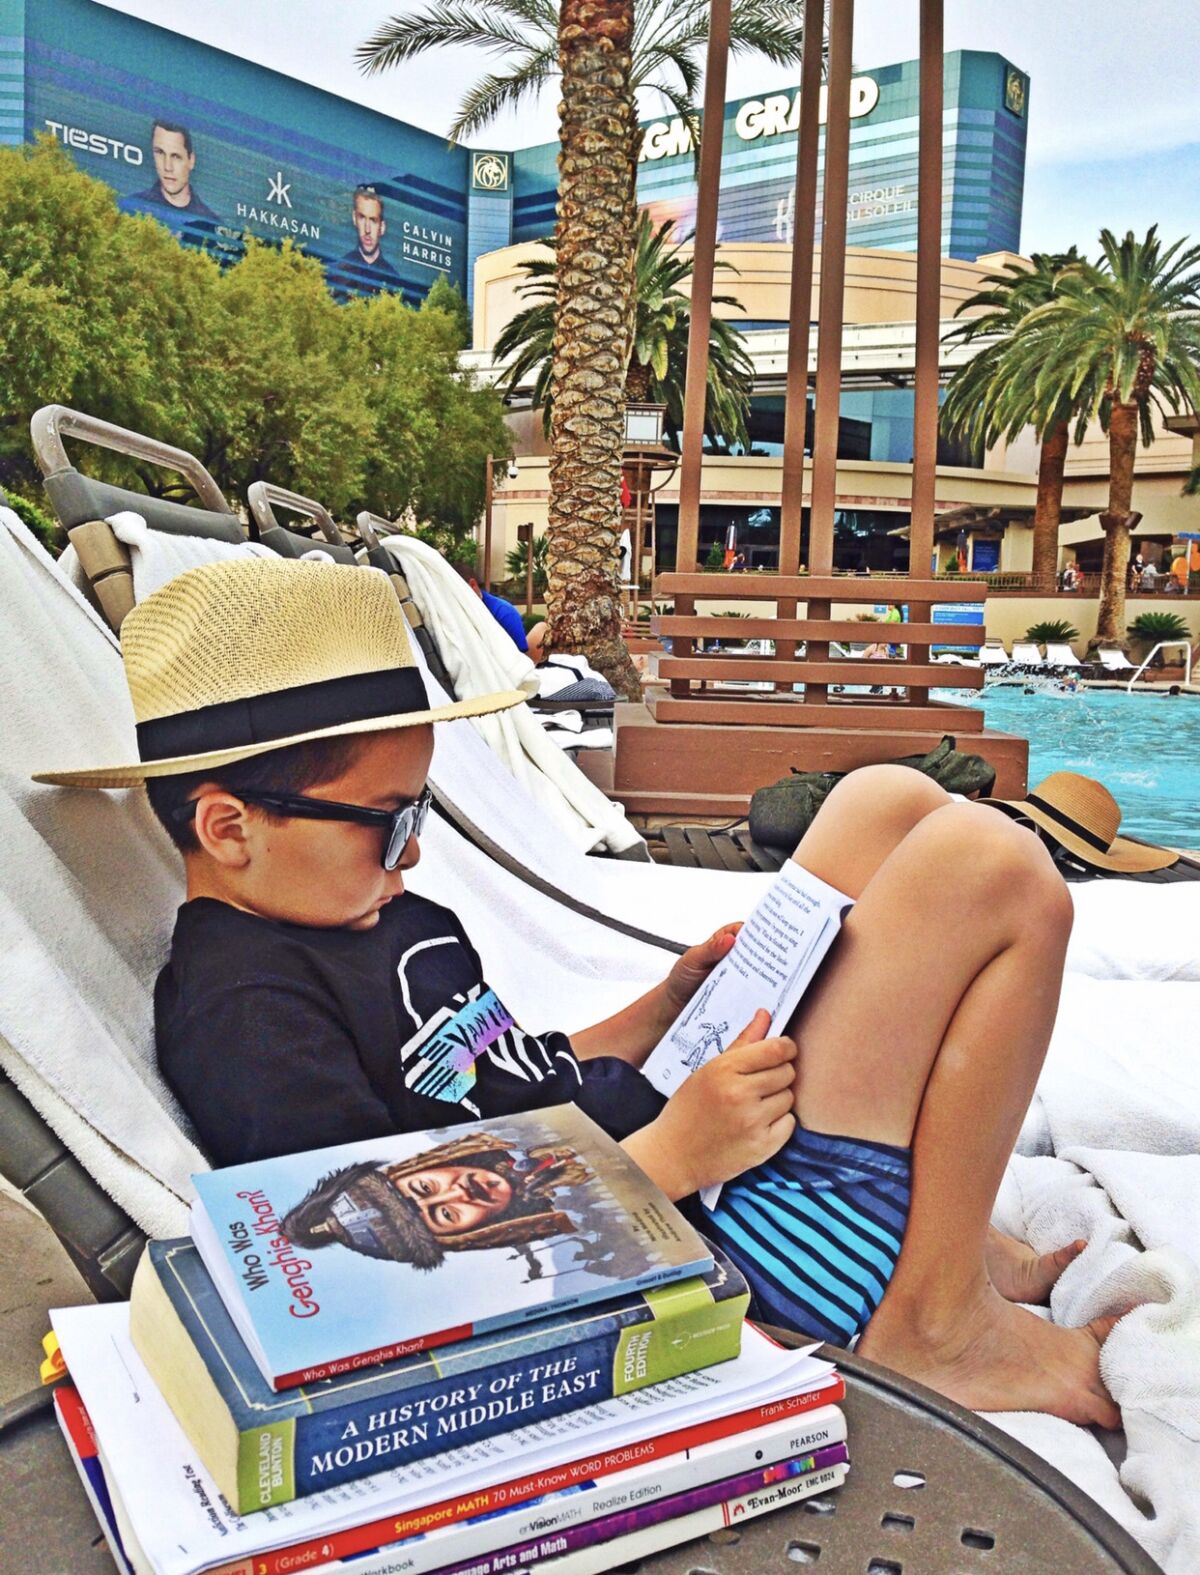 A boy reads a book in a lounge chair by a pool